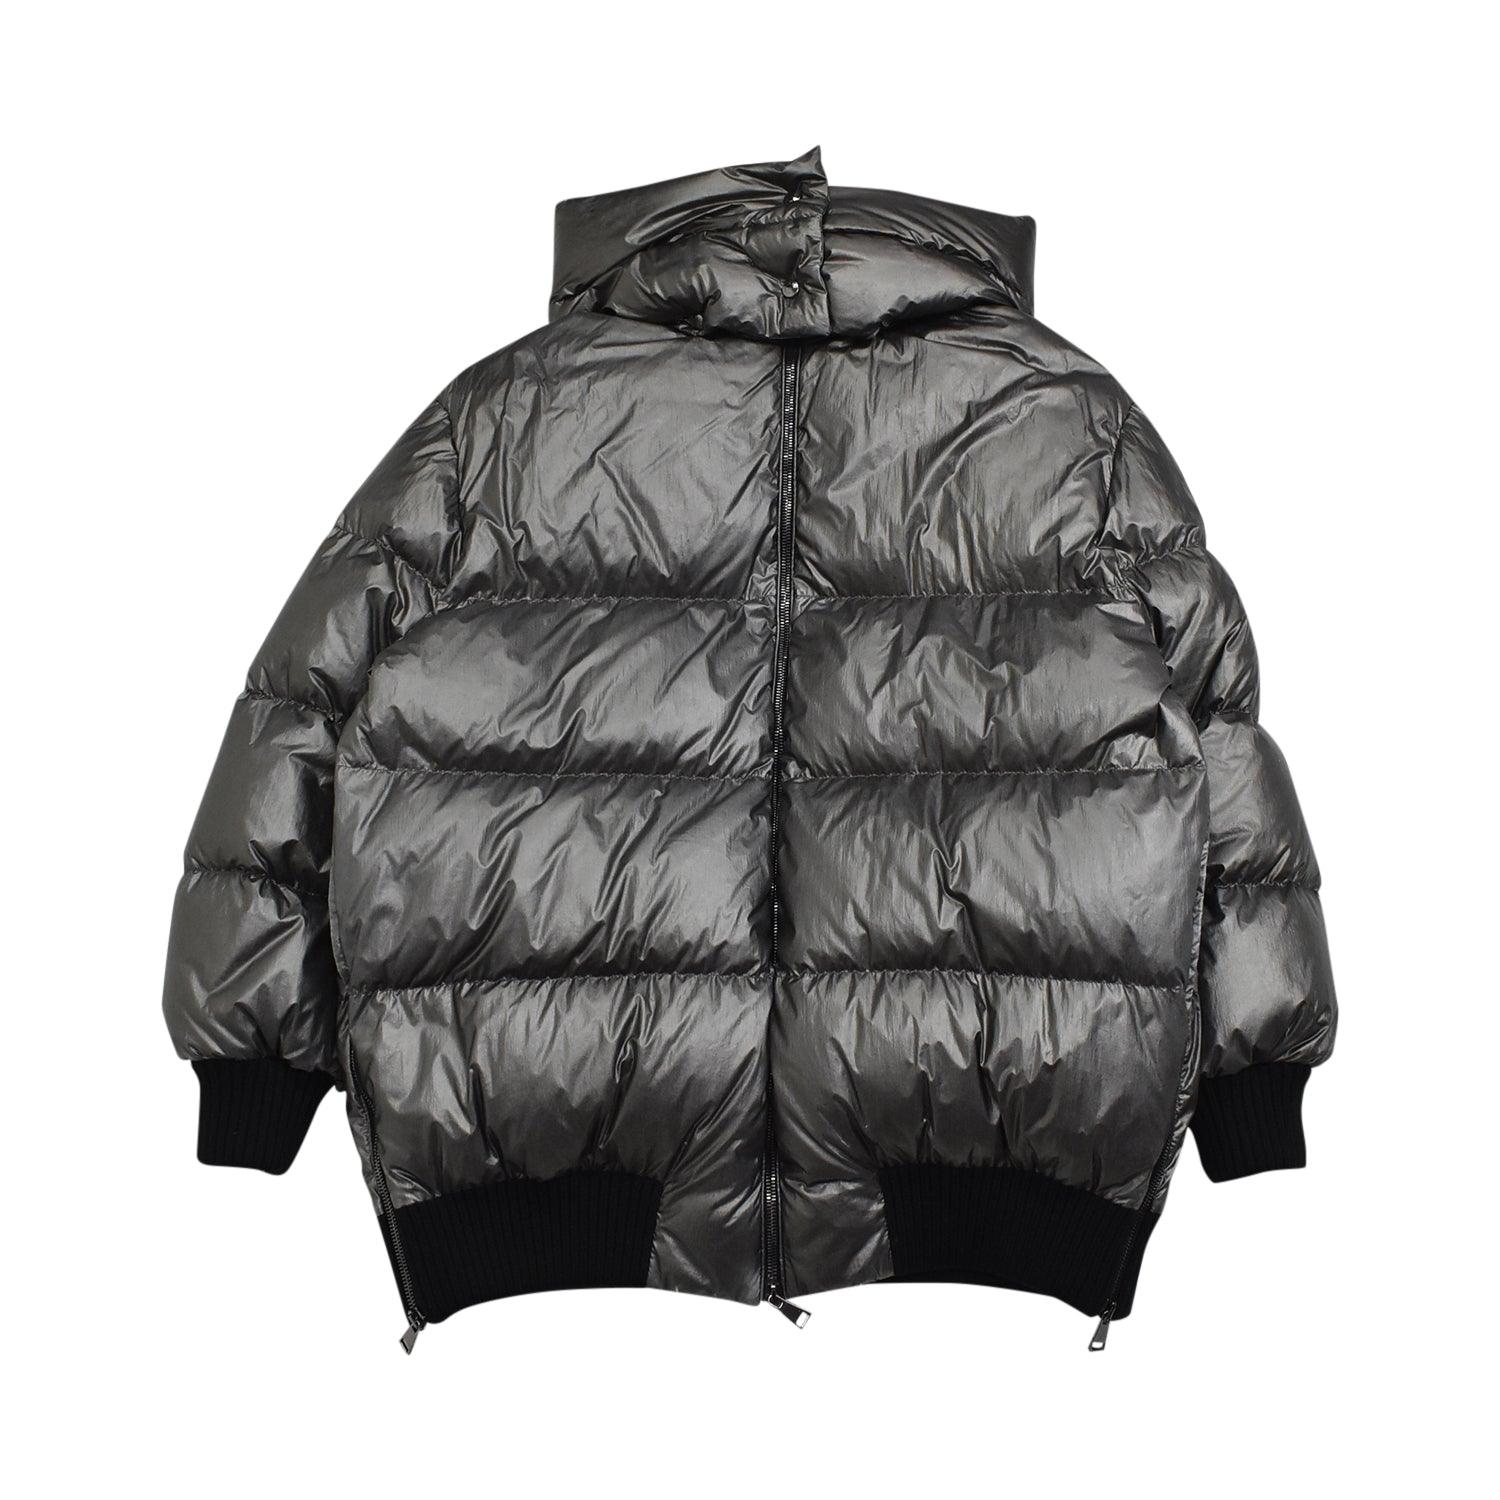 Moncler 'Verdier' Puffer Jacket - Women's 0 - Fashionably Yours